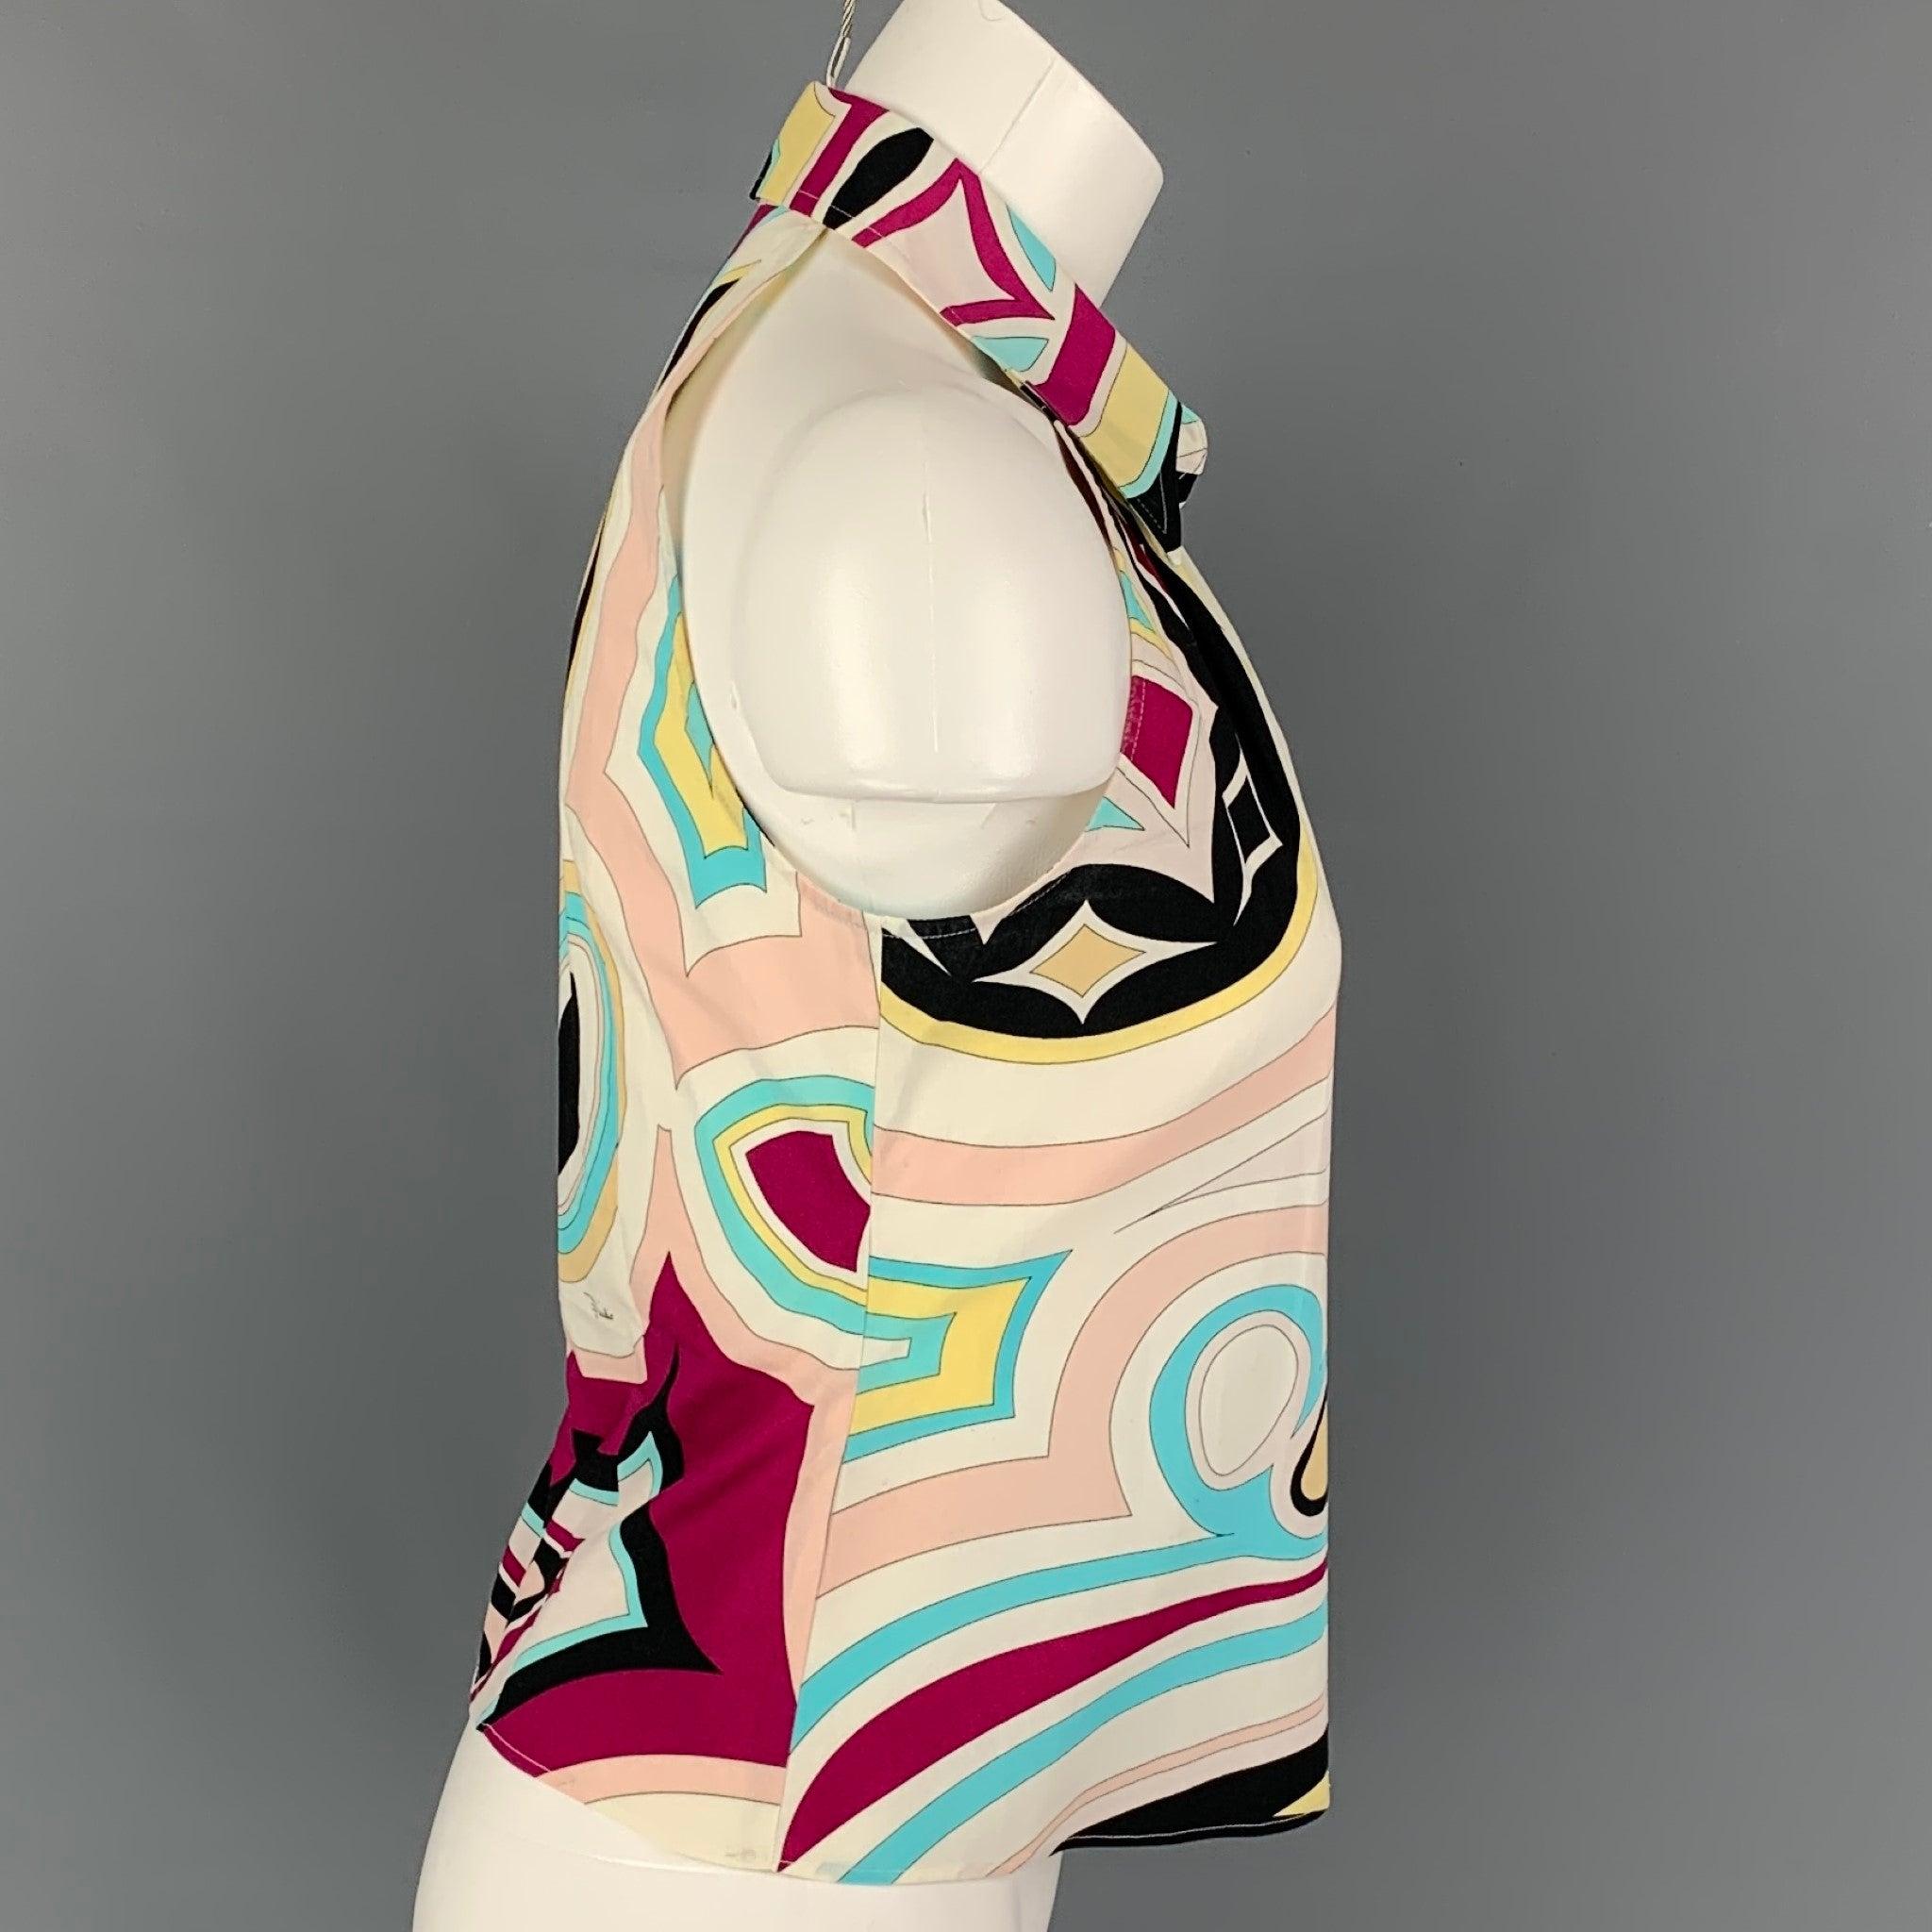 EMILIO PUCCI blouse comes in a multi-color abstract cotton featuring a sleeveless style, spread collar, and a button up closure. Made in Italy.
Good
Pre-Owned Condition. Light wear. As-Is.  

Marked:   I 40 / F 36 / US 6 / UK 8 

Measurements: 
 